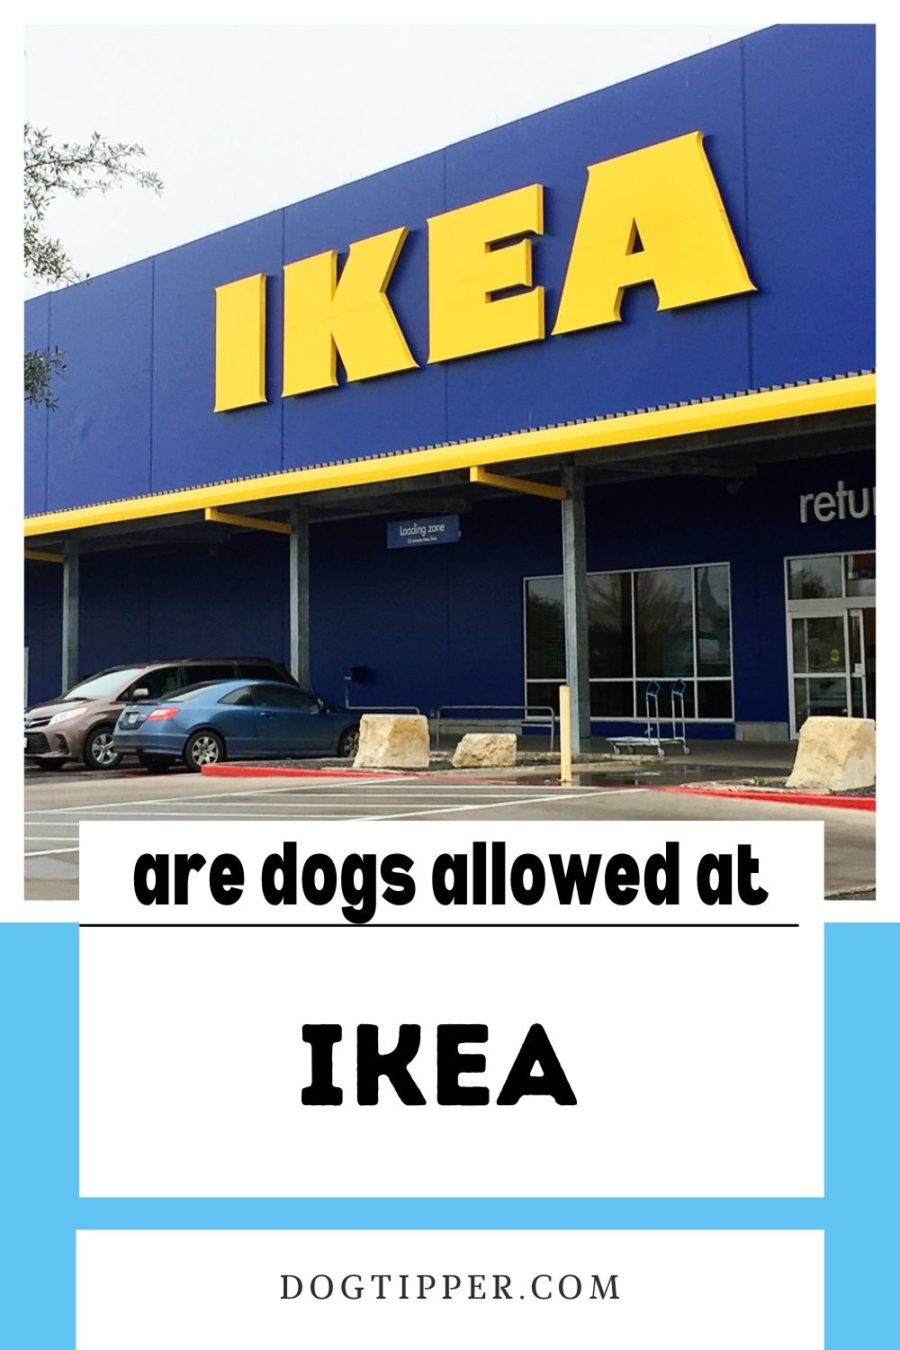 Can I Bring My Dog to IKEA?